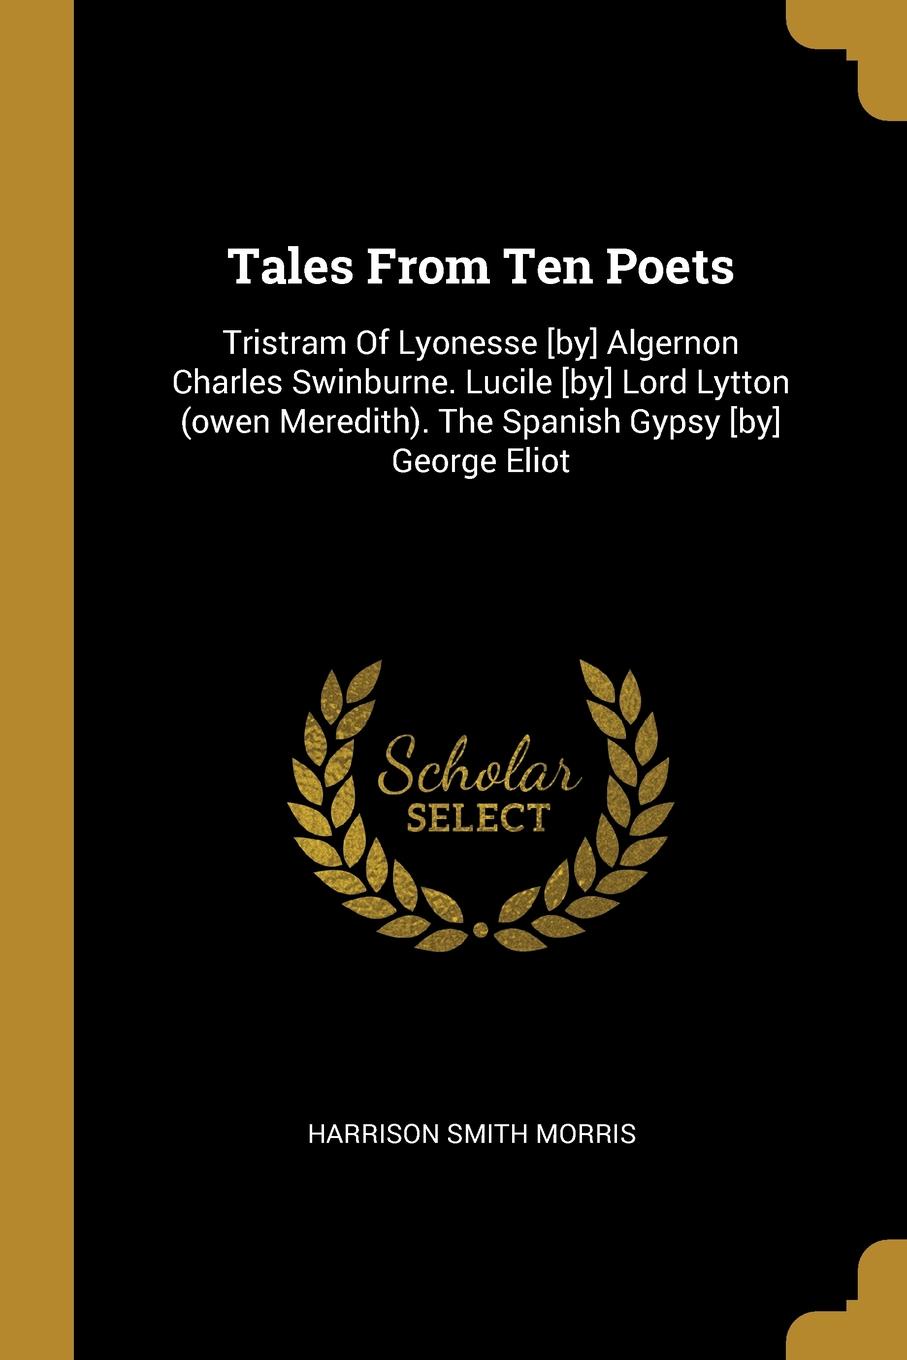 Tales From Ten Poets. Tristram Of Lyonesse .by. Algernon Charles Swinburne. Lucile .by. Lord Lytton (owen Meredith). The Spanish Gypsy .by. George Eliot